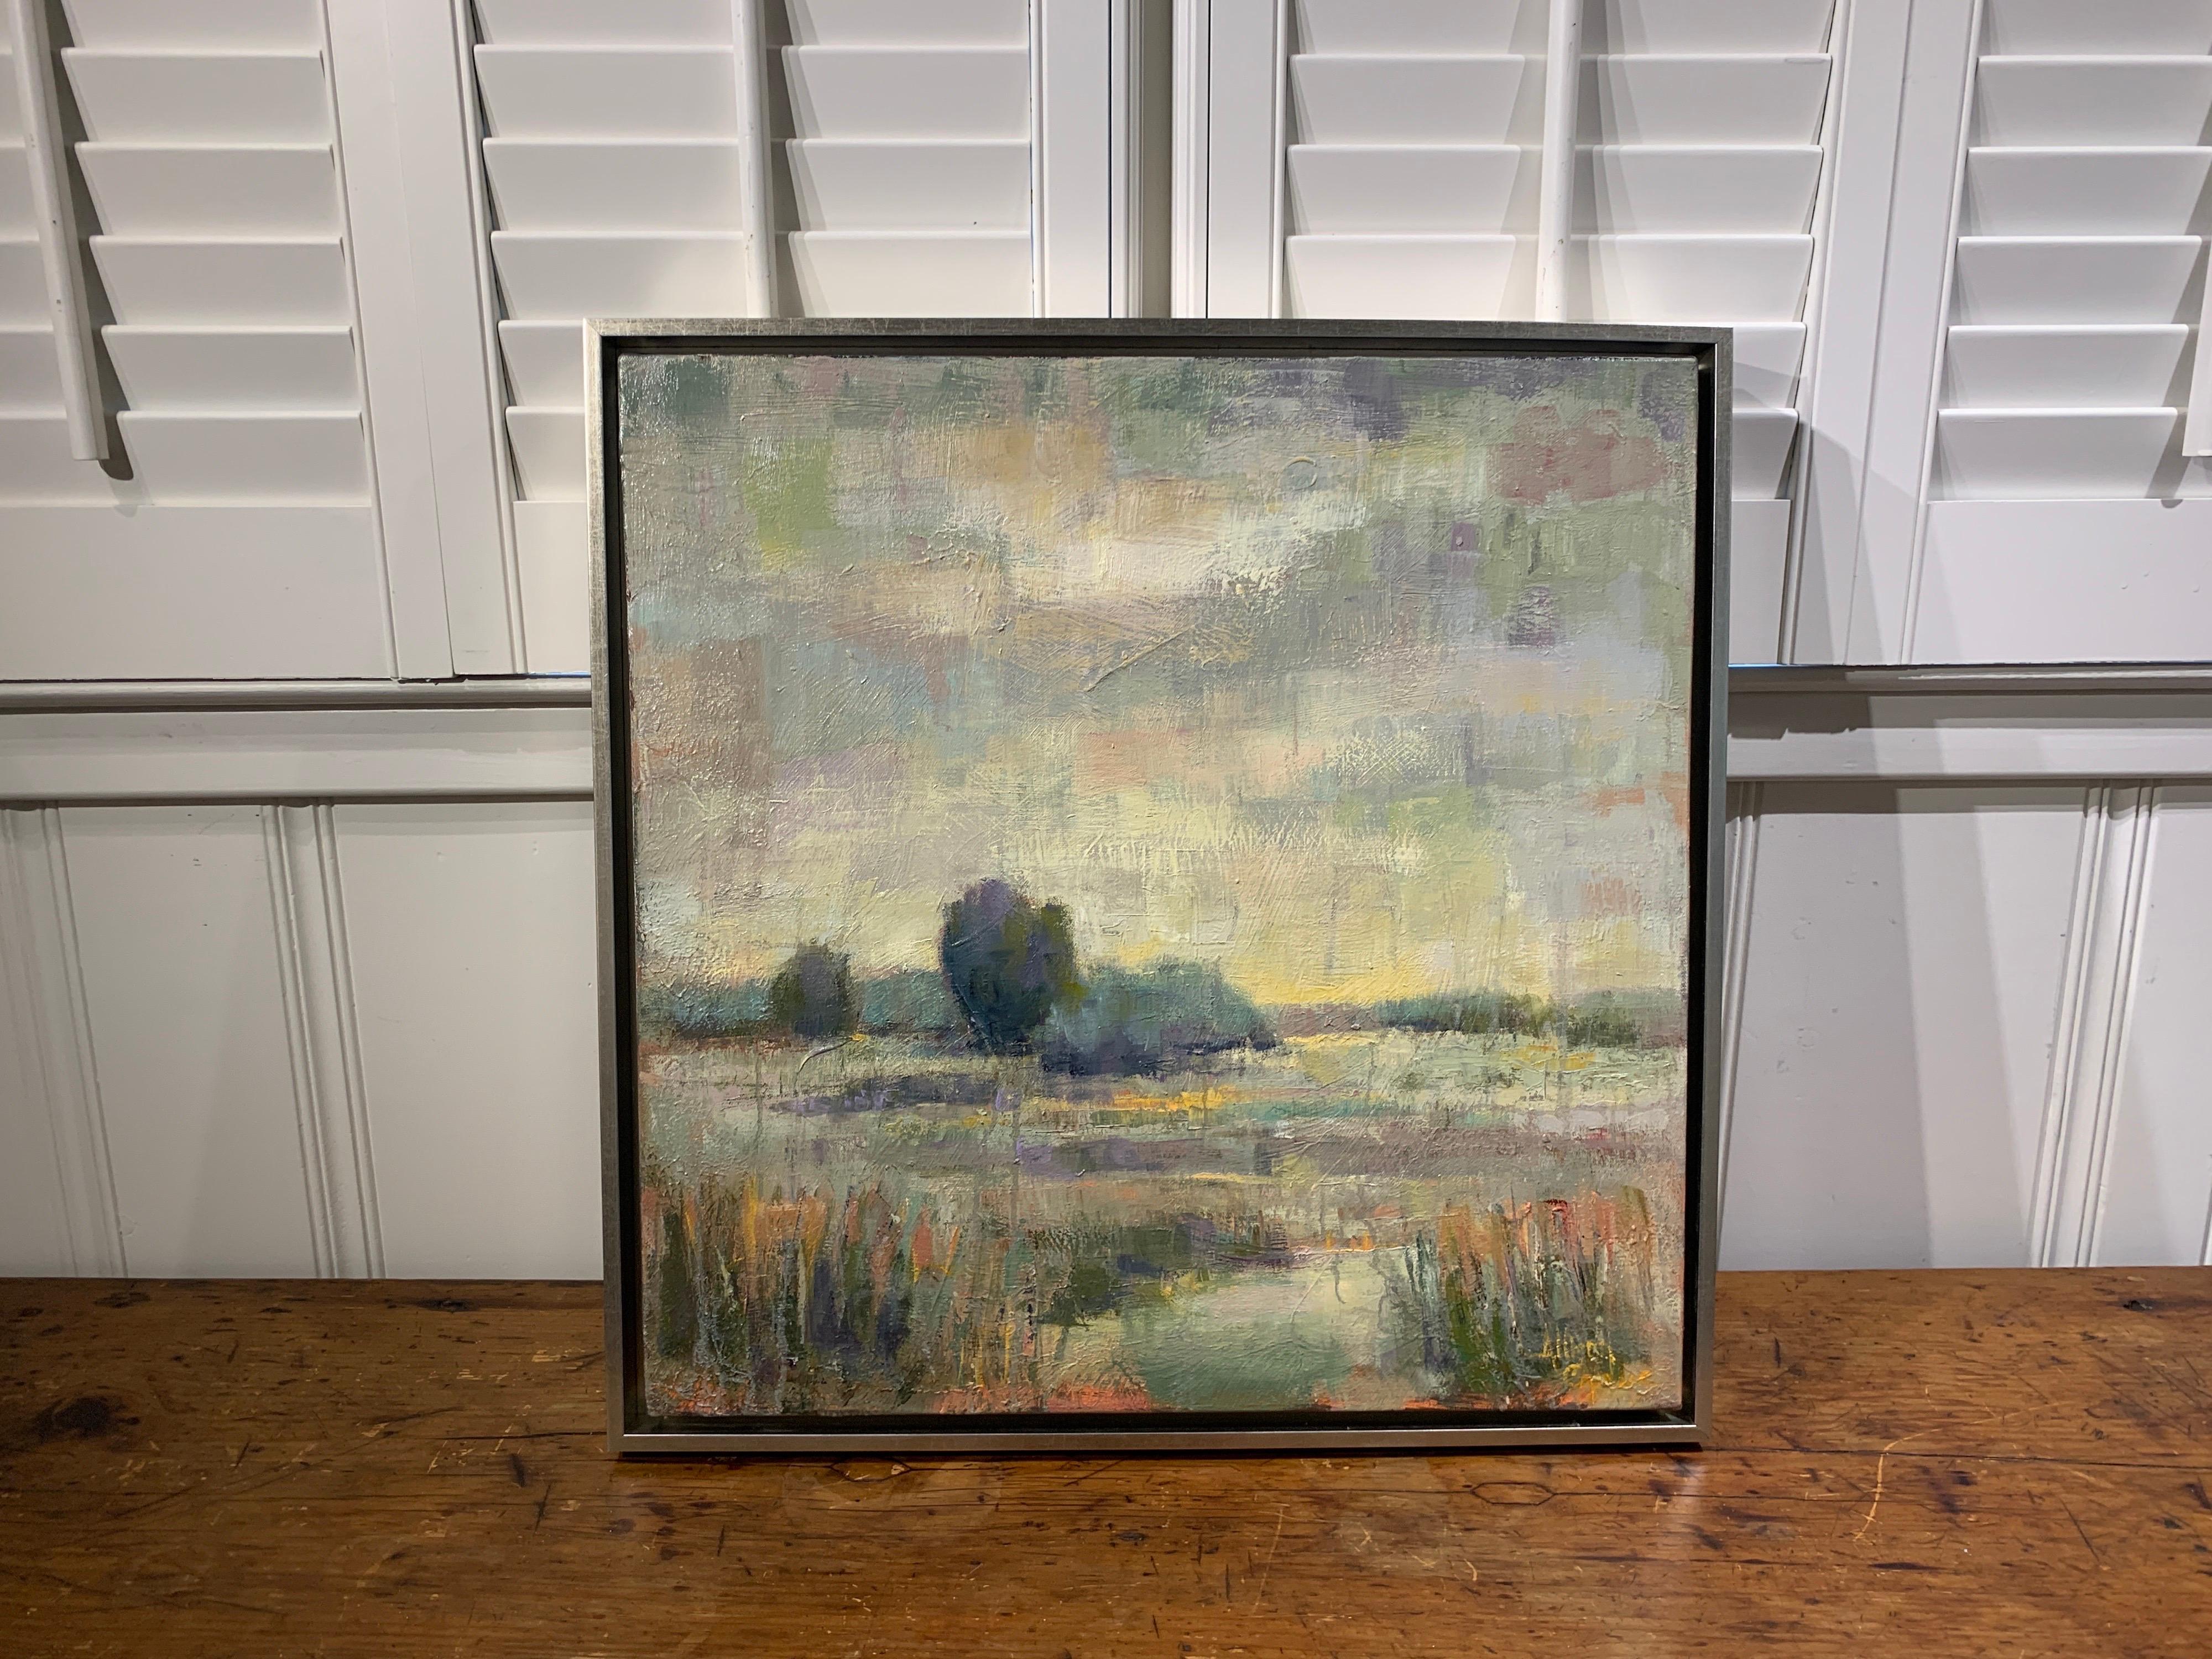 Storms are Lifting by Allison Chambers, Framed Oil on Canvas Landscape Painting 1